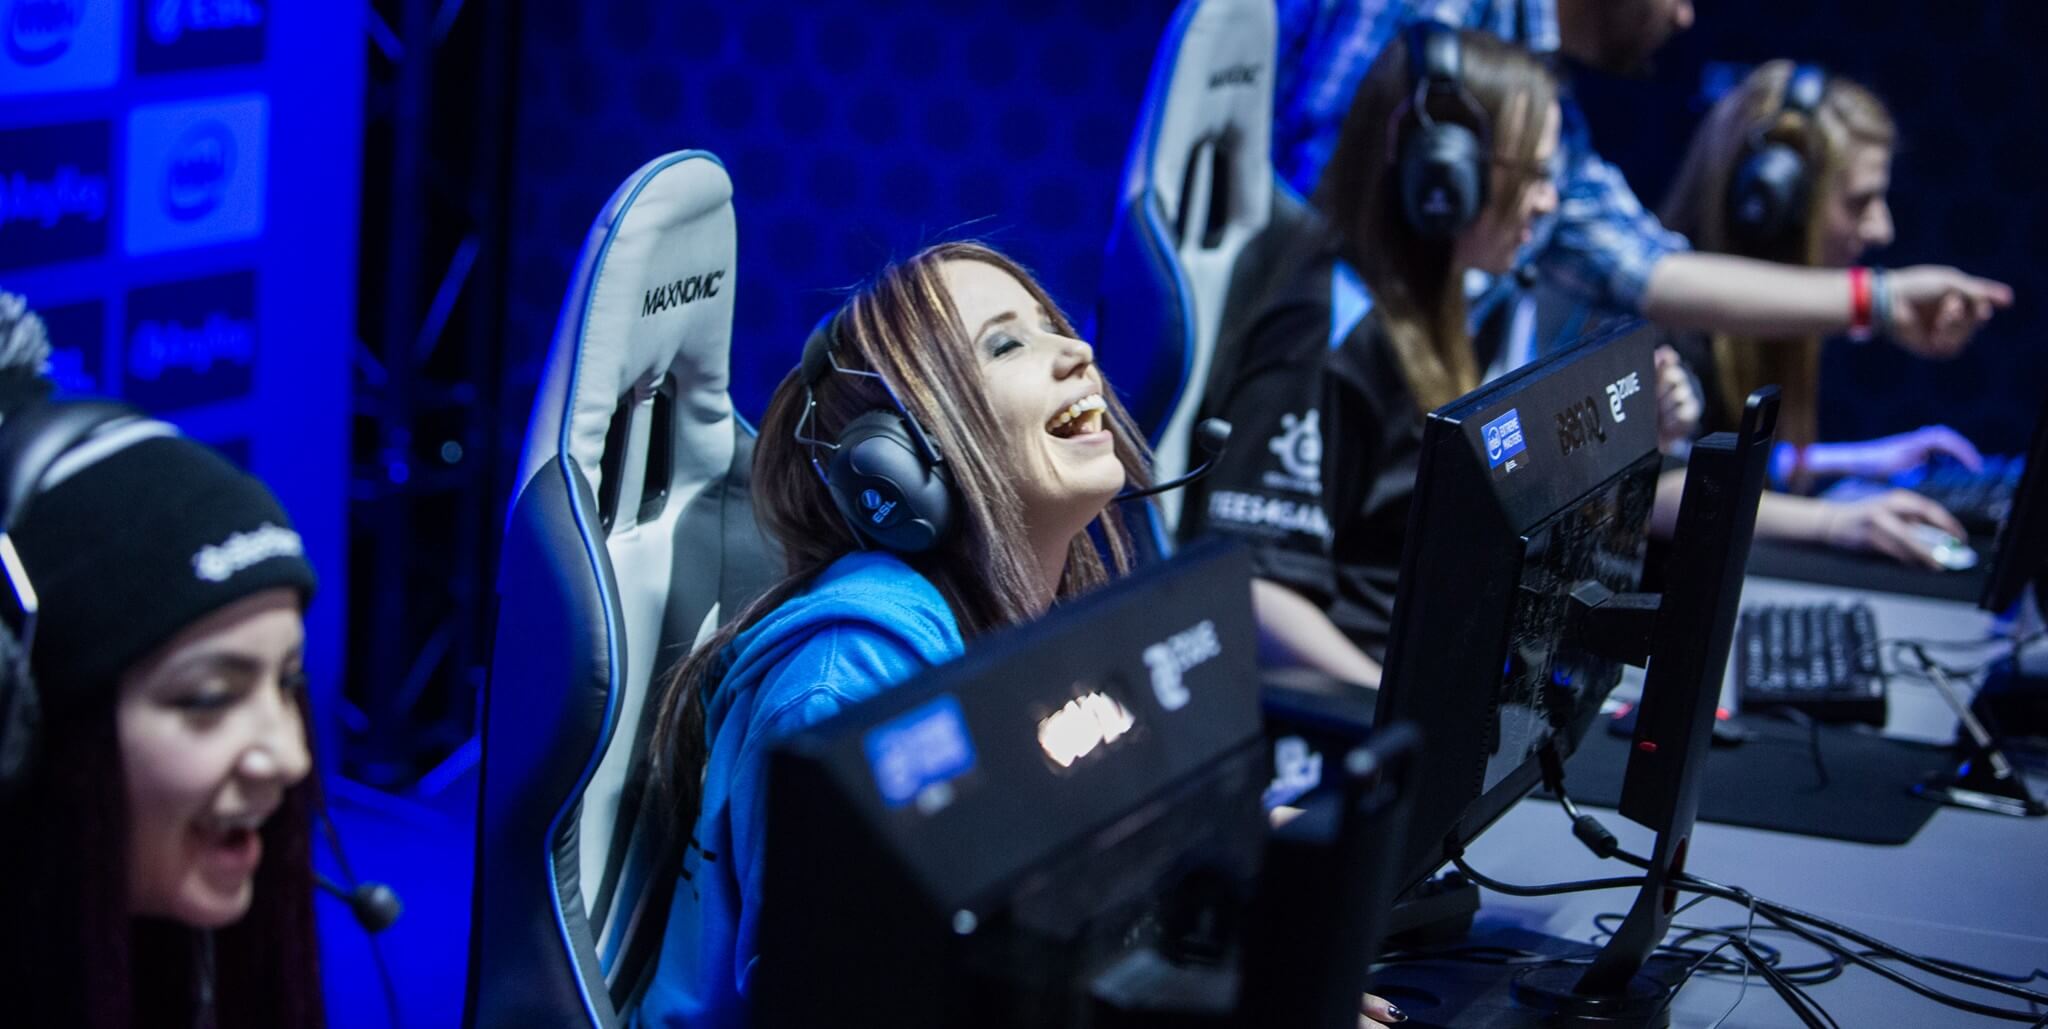 The number of women watching Esports has increased by 27% compared to men